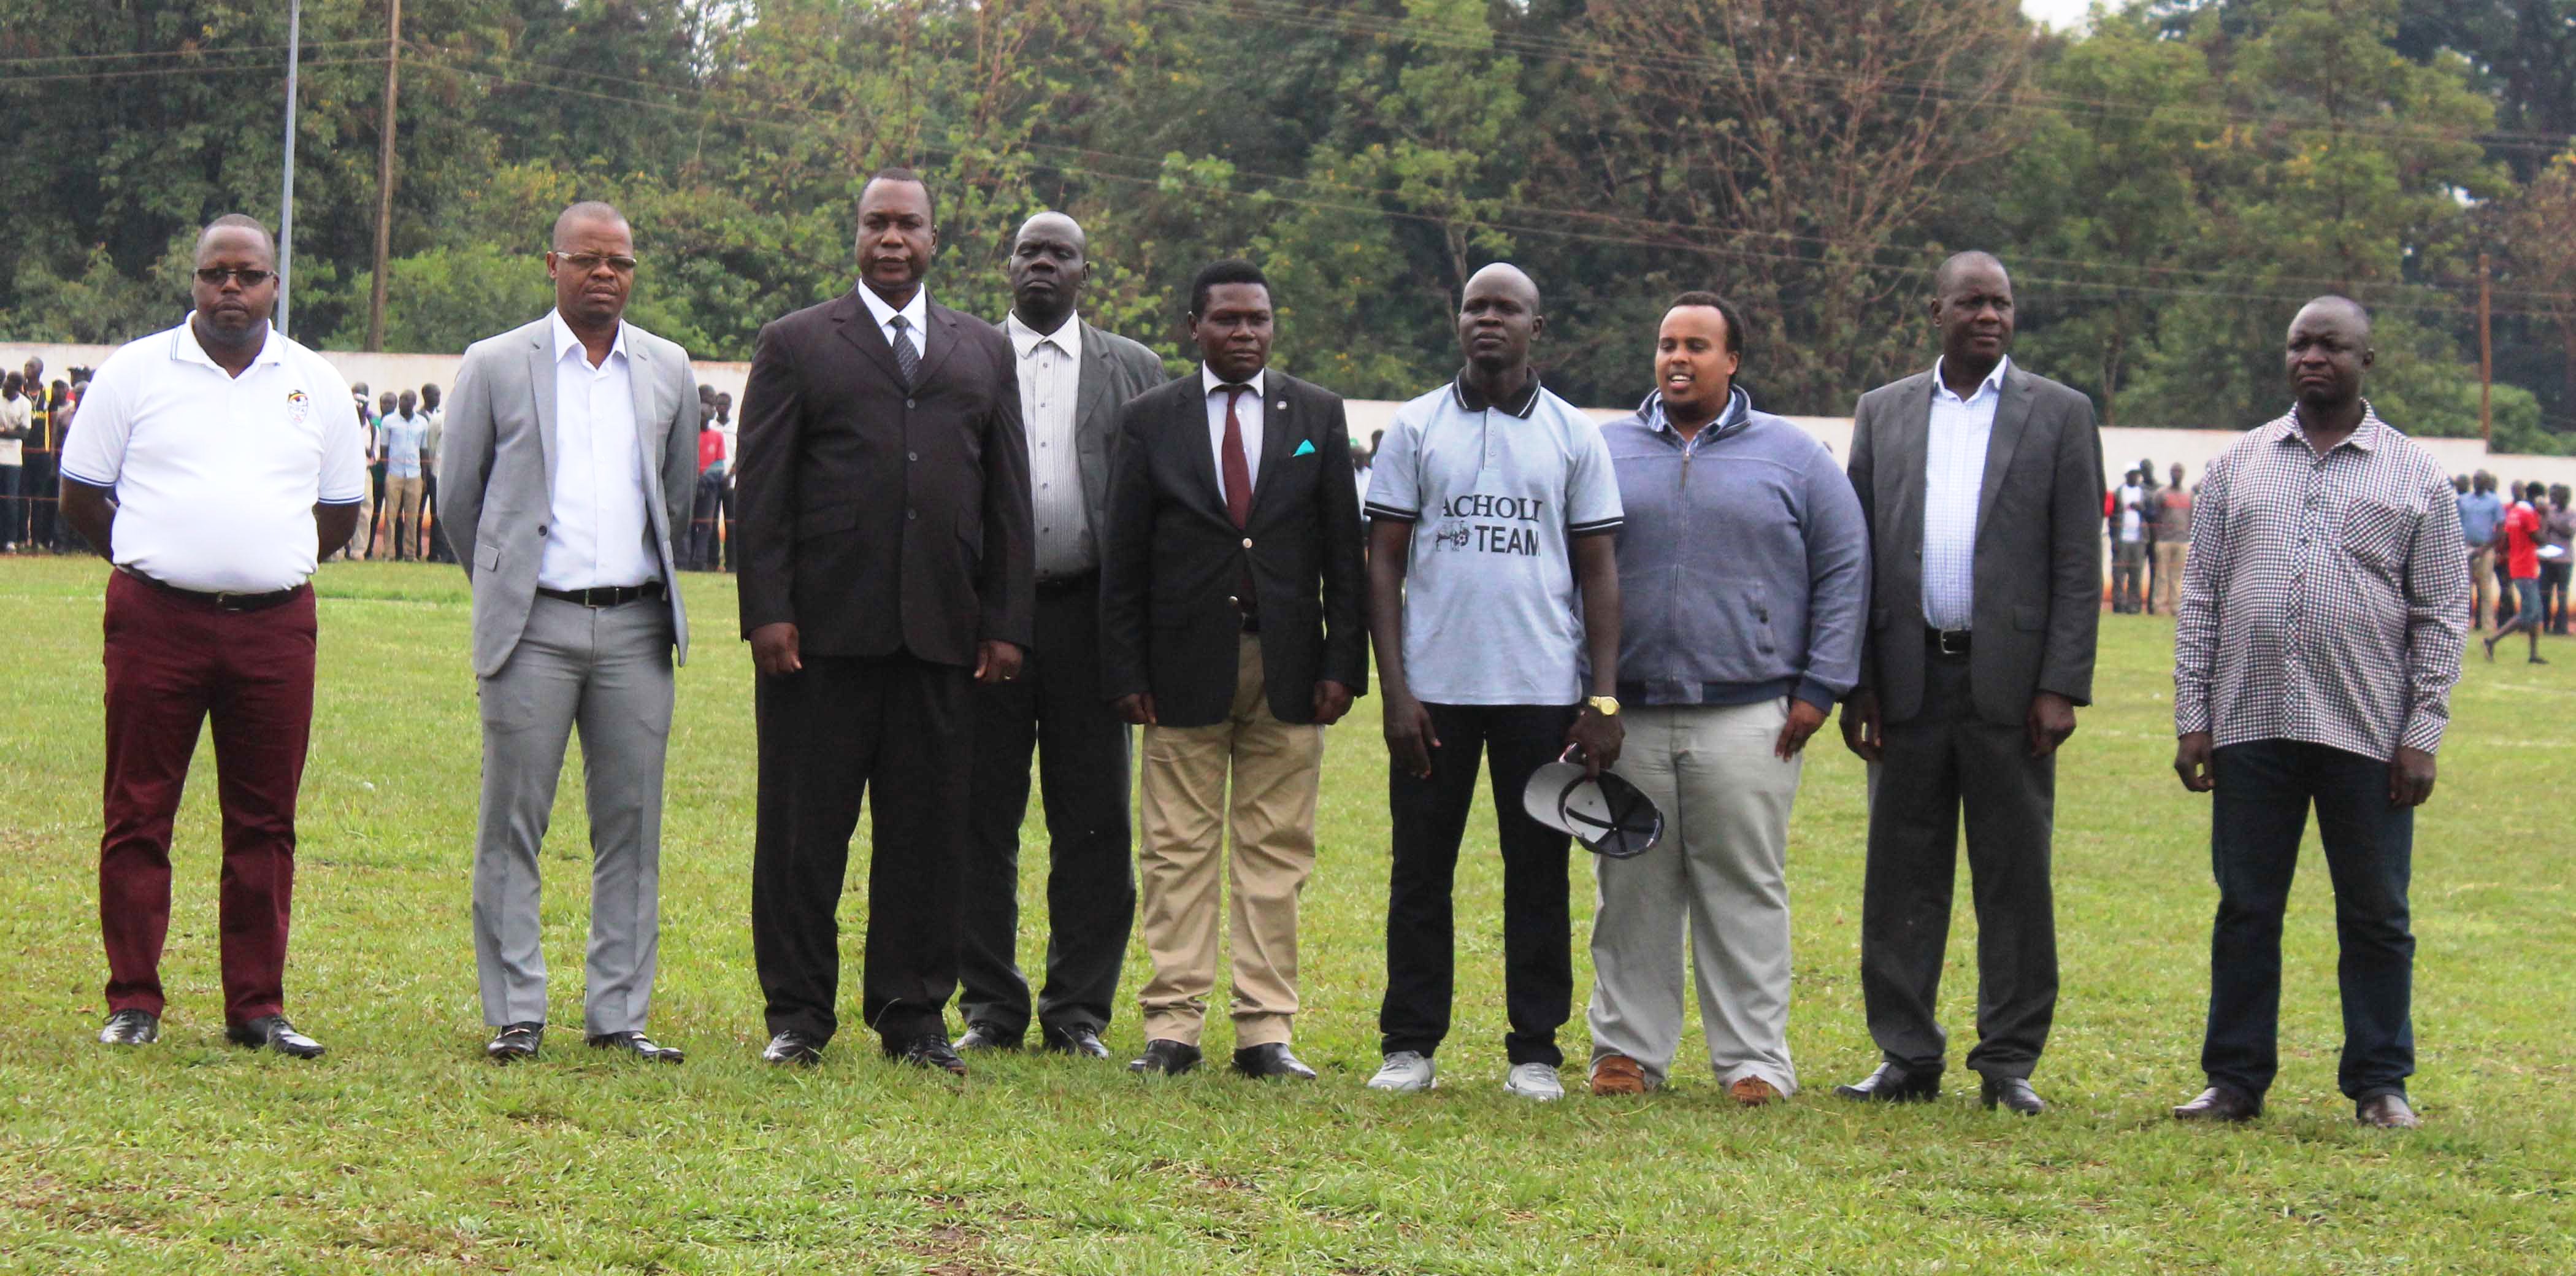 Dignitaries at Pece Stadium included the King of Acholi, Rwot David Onen Acana II (third from left), FUFA President, Eng. Moses Magogo (second left), Rogers Byamukama (extreme left), politican Norbet Mao (with red tie) among others